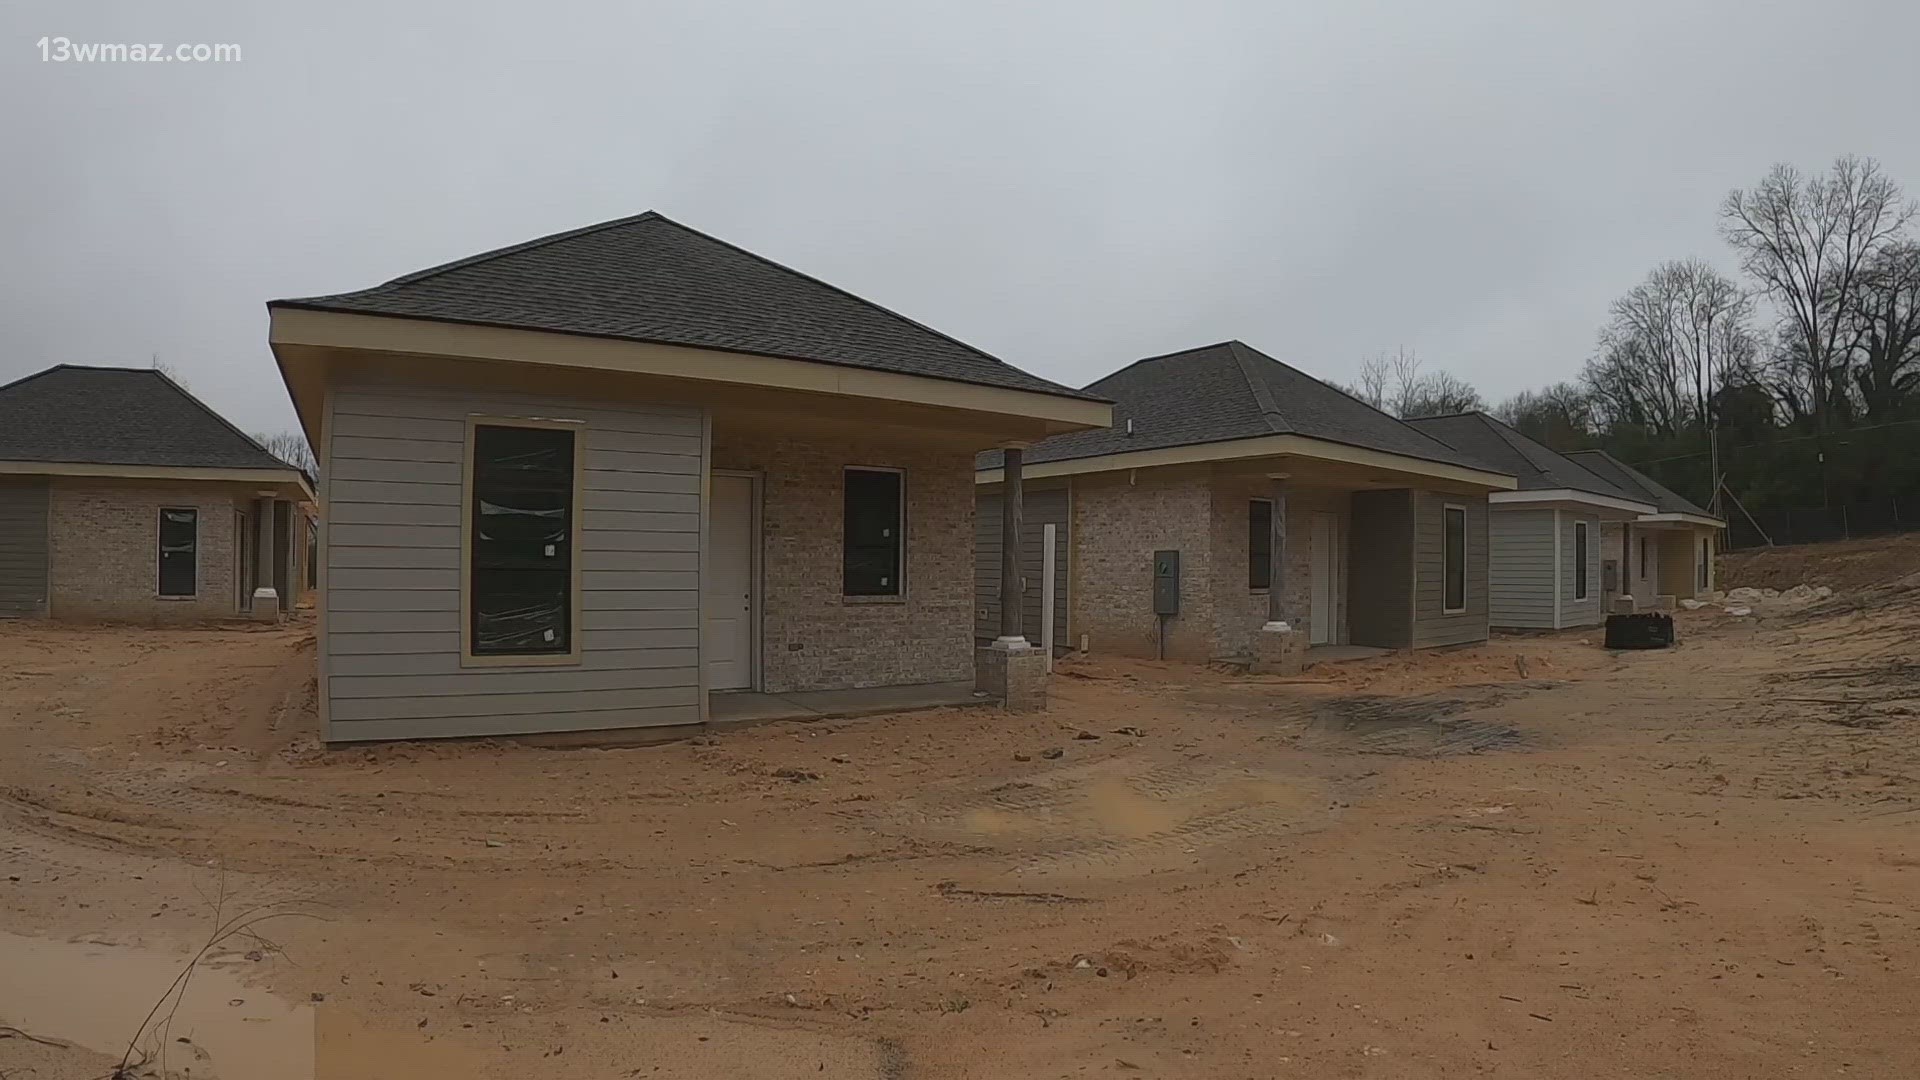 River Edge Behavioral Health is building permanent homes in east Macon for homeless people. They hope to have the ten homes completed in May 2024.